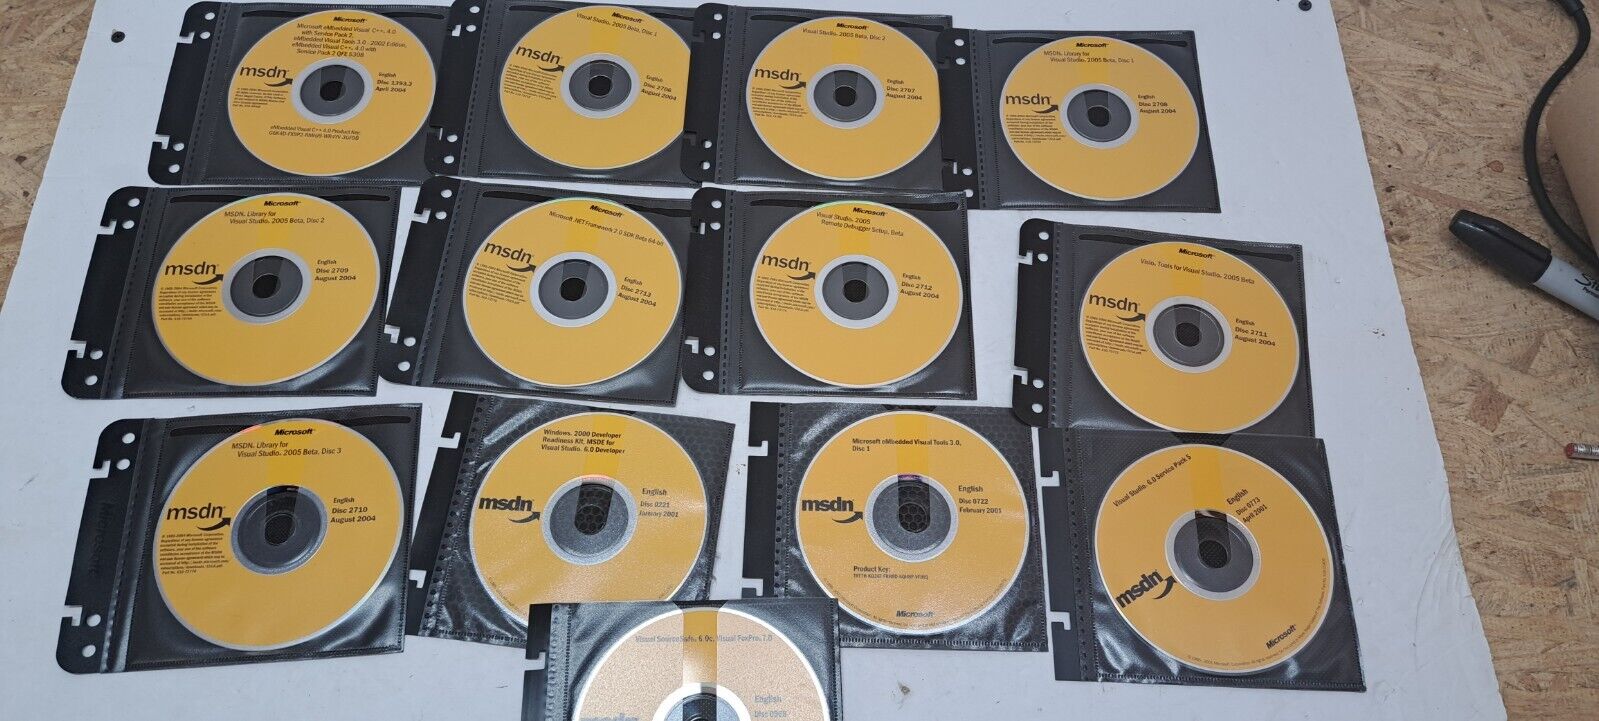 Microsoft MSDN 2004 disk lot see pics for titles 8/2 L12